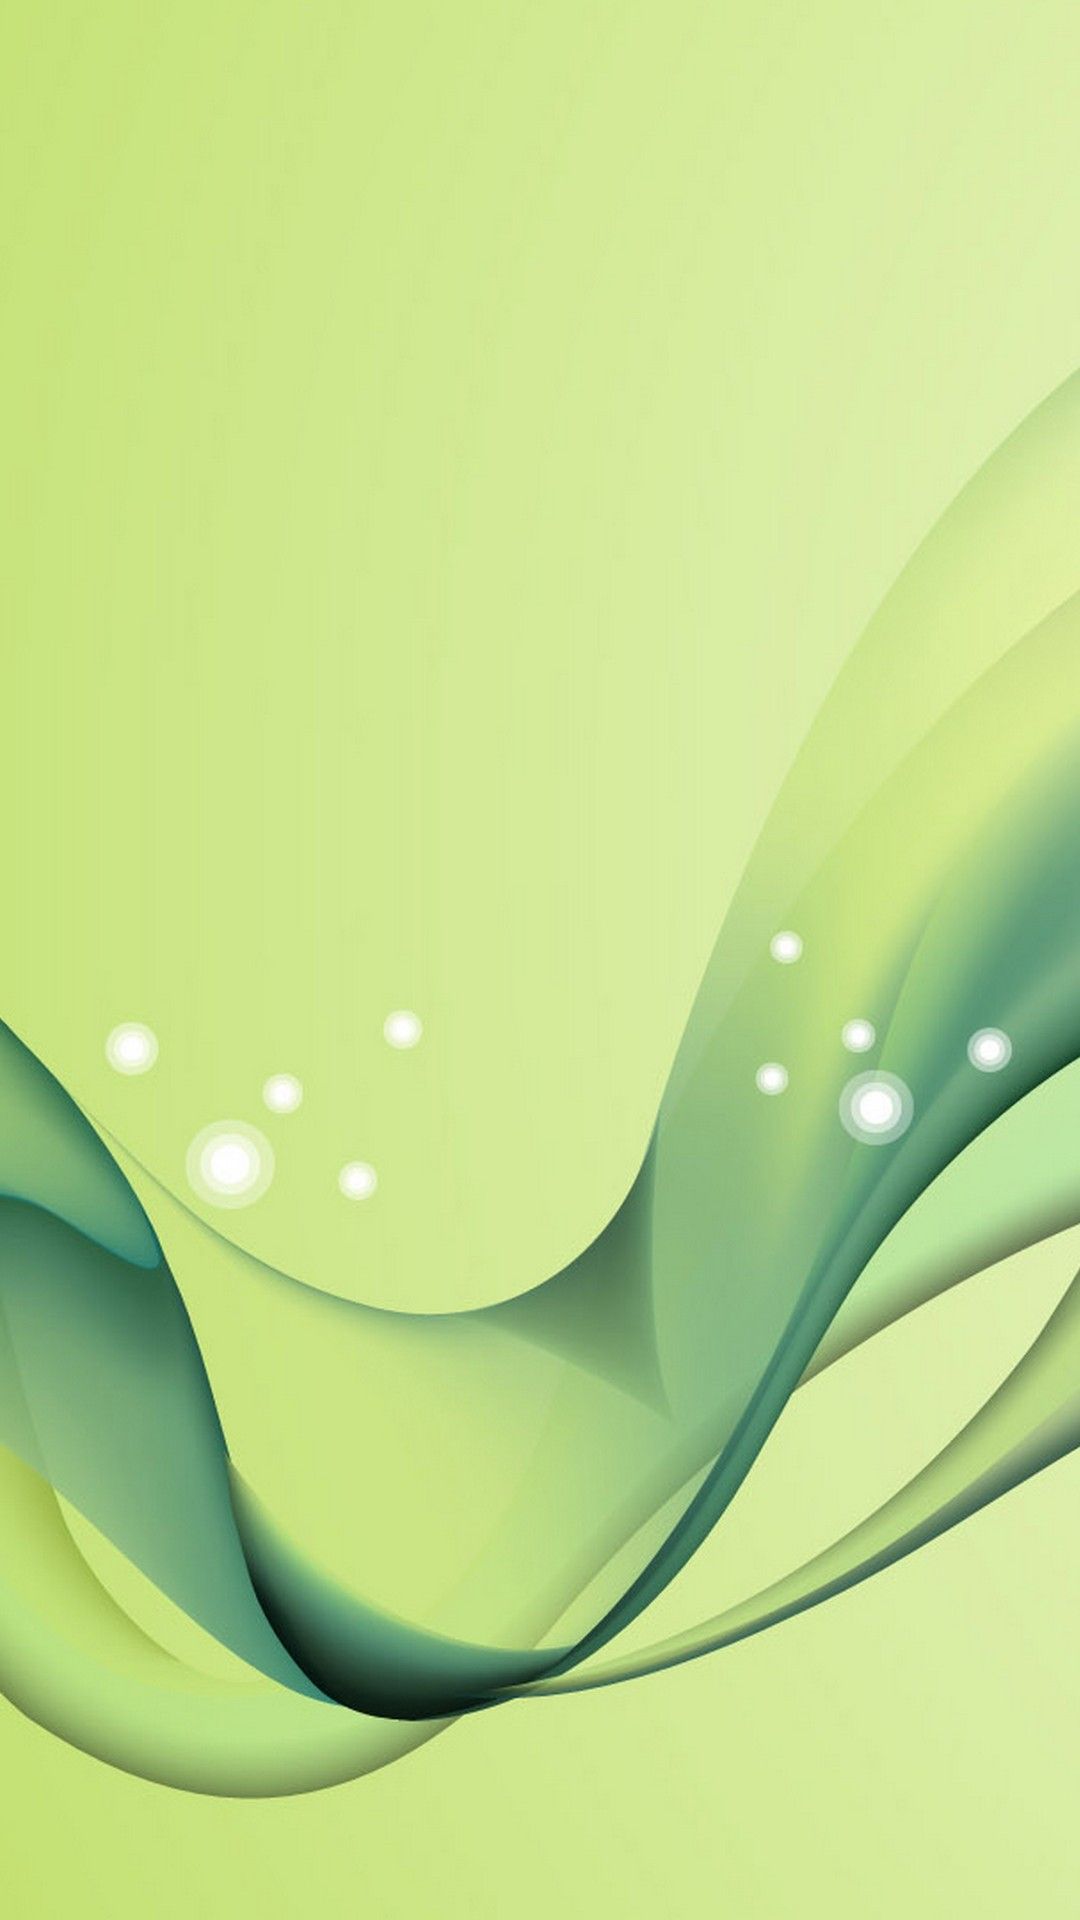 Wallpaper Phone Green Colour Android Wallpaper